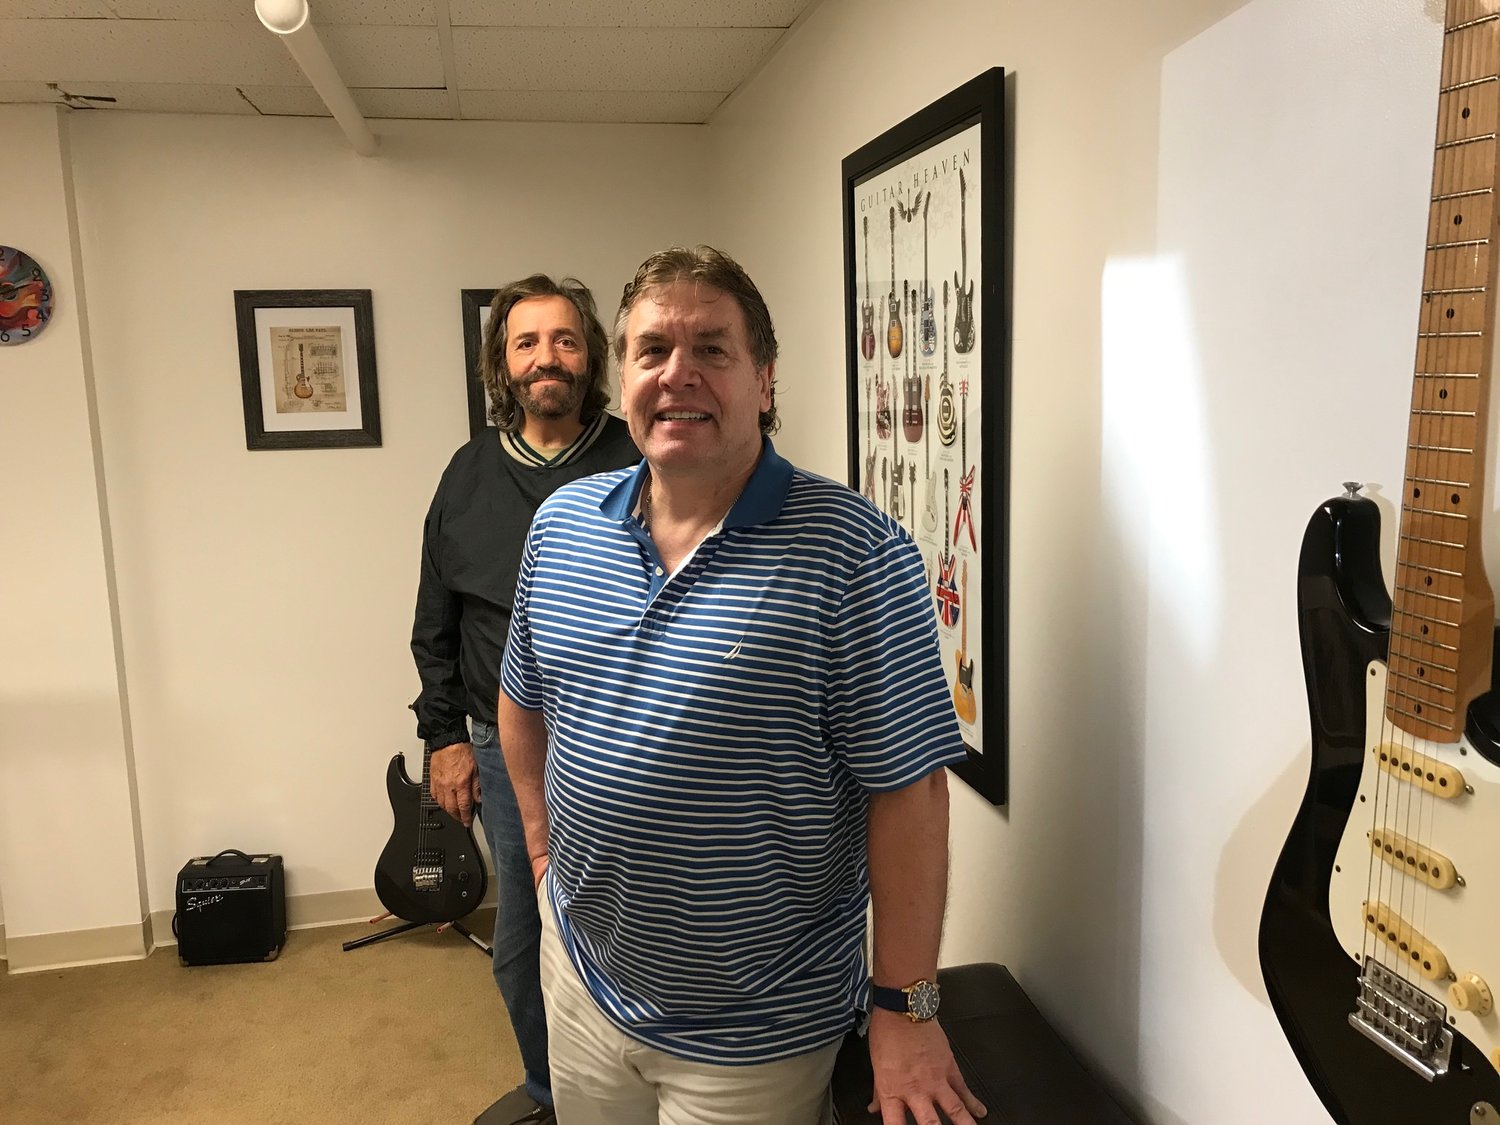 Tom DeSisto (left) and Gary Ferguson recently opened East Bay Music Studio and Recording inside a space at 310 Maple Ave. “Everyone who comes in here has given great reviews,” Mr. DeSisto said.